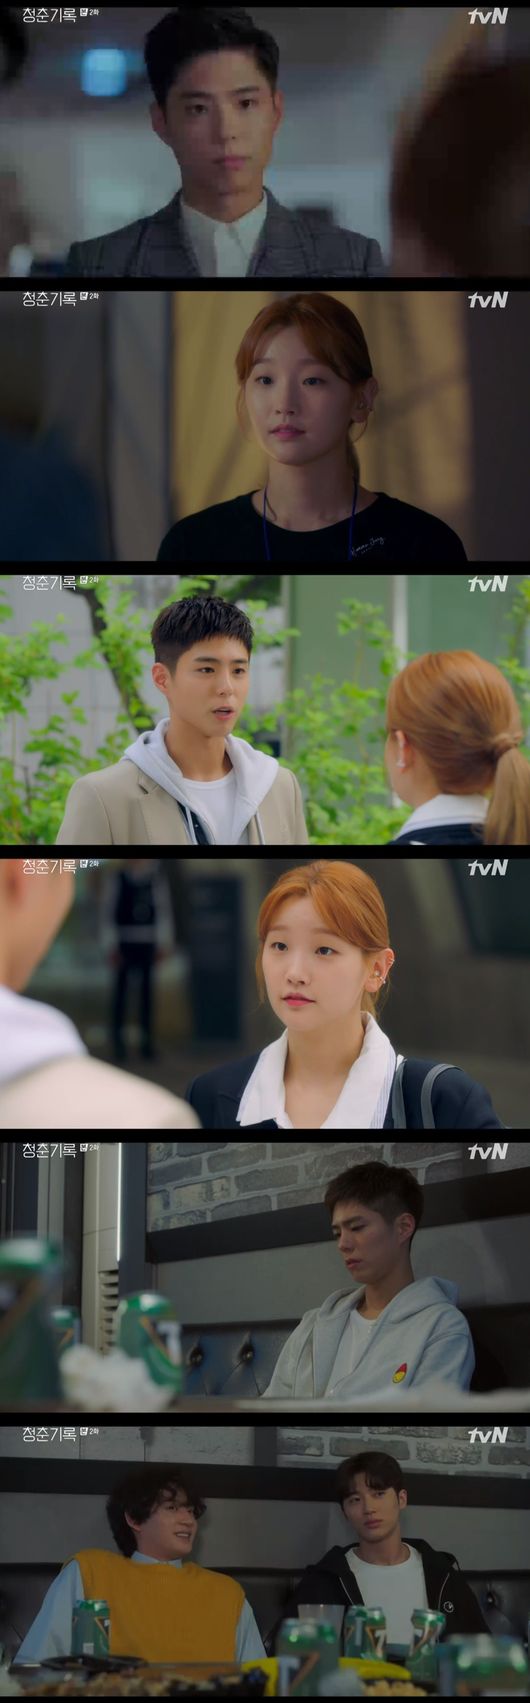 After Park Bo-gum failed to audition, he decided to go to Army and asked Park So-dam for a haircut.On TVN Record of Youth broadcast on the 8th, Sa Hye-joon (Park Bo-gum) told Park So-dam that he was going to Army after failing to audition.I am not a fan of yours, but a fan of Won Hae Hyo, he lied to Sa Hye-joon.Sa Hye-joon suggested that he go to the Korea-Japan War together with An Jeong-ha, suggesting Friend because he is the same age, but he refused to stabilize.Ill see you later, said Sa Hye-joon, who appeared at the fashion show and said, How do you look later? Such a doctor is not good.So, Sa Hye-joon asked Ahn to contact him. Sa Hye-joon asked, Do not you usually follow if you are good?Then my life shakes, my life has to be hard, he said.I talked to Sa Hye-joon, who is stable, but he looked at the back of Sa Hye-joon and said, I talked to people and I feel like talking to dolls.On this day, Sa Hye-joon was disappointed to learn that he had fallen from the movie audition. In addition, Sa Hye-joons father, Sa Young-nam (Park Soo-young), knew that Sa Hye-joon had fallen from the audition.Go to Army, said Sa Hye-joon, disappointed that even his family doesnt support him.Lee Min-jae (Shin Dong-mi) suggested Sa Hye-joon go to the Milan fashion show, but Sa Hye-joon said, You have to go to Army, I will close things up with Army as a turning point.However, Lee Min-jae persuaded Sa Hye-joon and eventually set Sa Hye-joon on the stage of the Milan fashion show.After arriving at the airport after the Milan fashion show, Sa Hye-joon met Won Hae-hyo. They visited An Jeong-has shop.Won Hae-hyo said, If you are a friend, you are my friend. Sa Hye-joon met Ahn Jeong-ha and introduced you to Won Hae-hyo and said, He is your fan.You really have a mouth, said Sa Hye-joon, who was stable. Are we that close?When I left alone with Won Hae-hyo, who was stable, he said, I am not your fan. Hye-joon is a fan.Sa Hye-joon informed An Jeong-ha of the information on the picture book and said, I should not win once with Jinju teacher.Sa Hye-joon was told by Lee Min-jae that the reason for his audition was not his acting ability but his recognition. Sa Hye-joon came to Ahn Jung-ha and said, Please push my head with a barricade.Army goes, and he was embarrassed to hear the story of Sa Hye-joon. : TVN Record of Youth broadcast capture